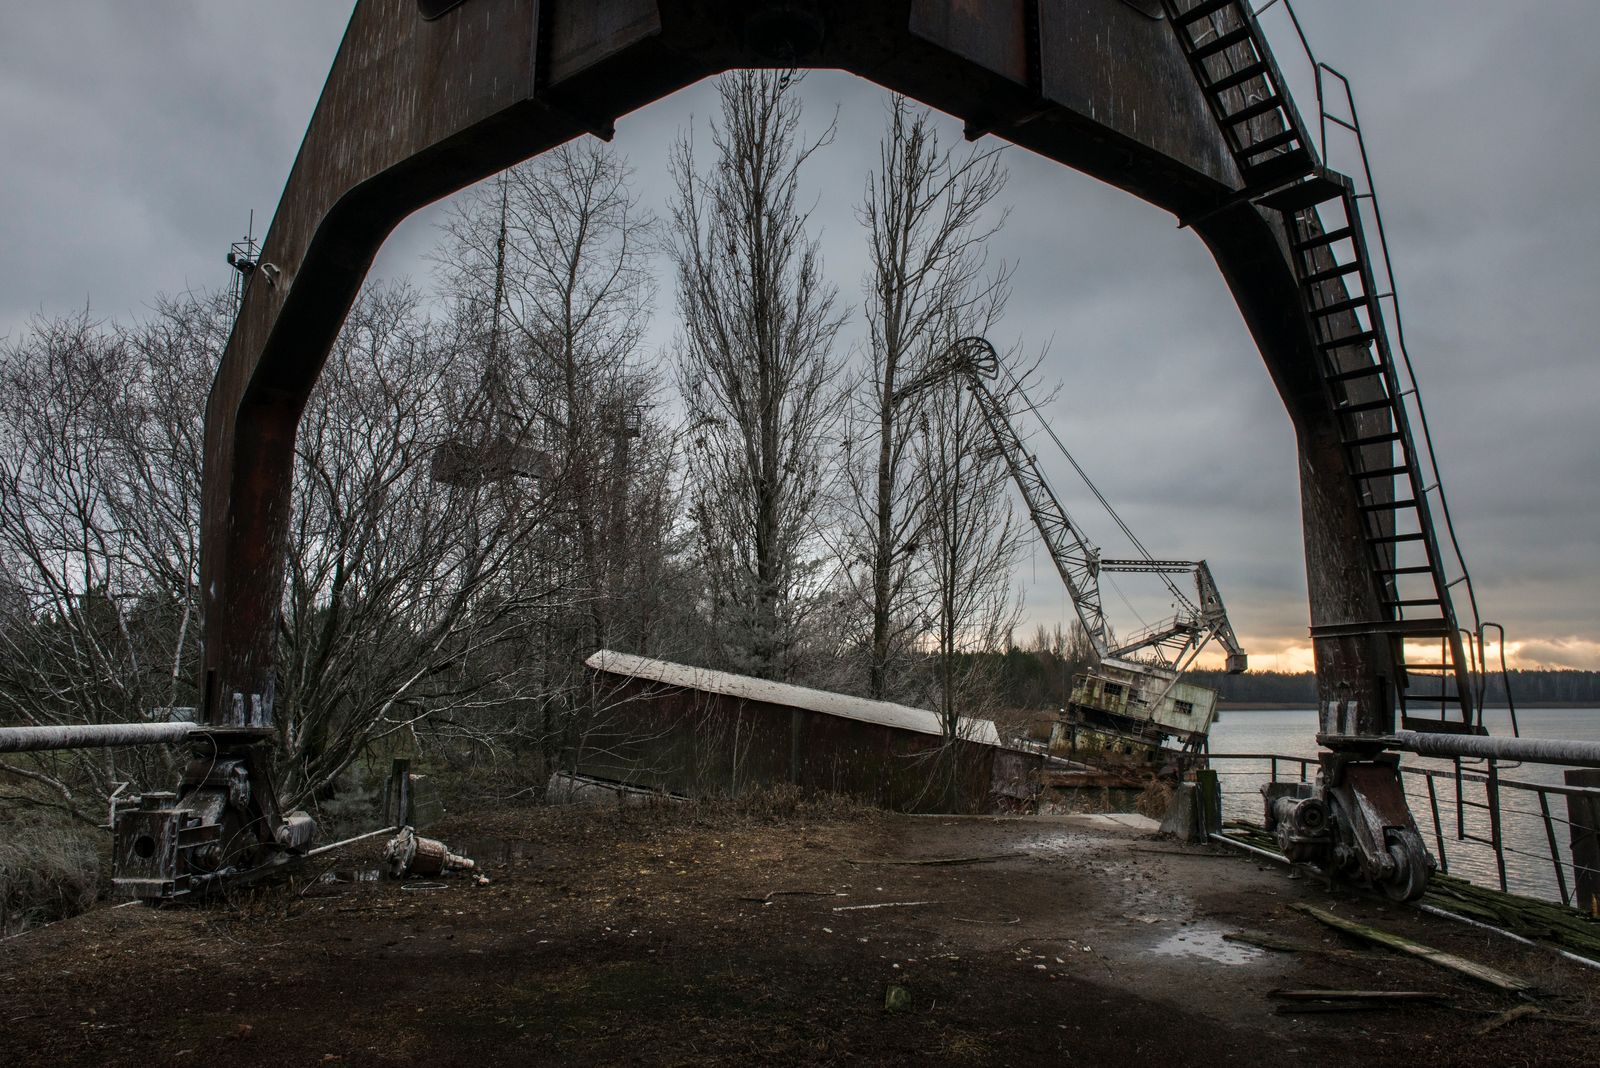 © Pierpaolo Mittica - Abandoned cranes in the Chernobyl river port